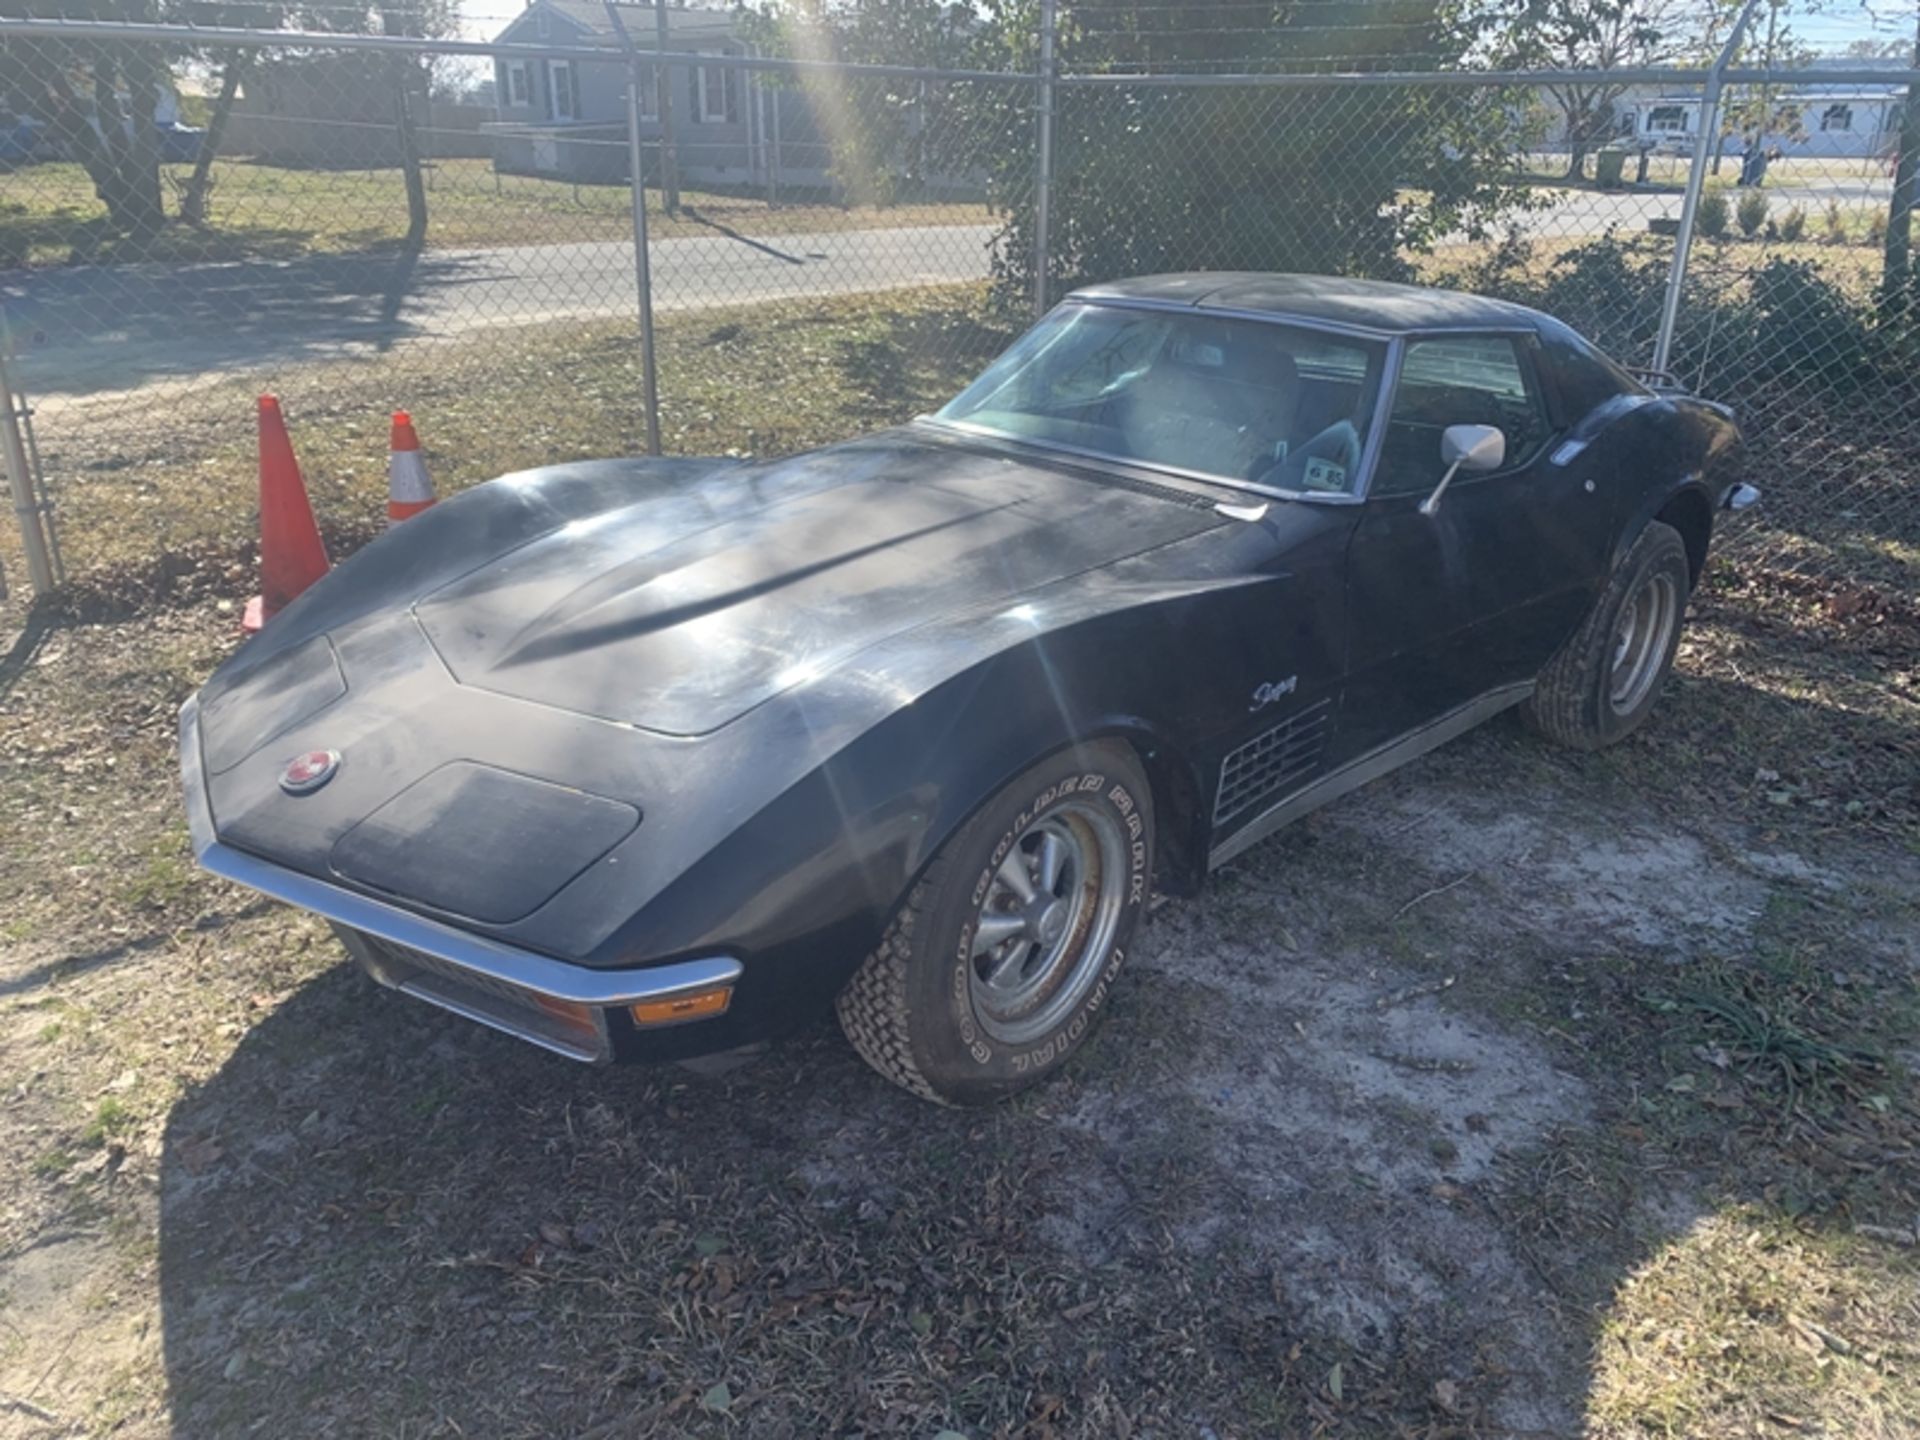 1972 CHEVROLET Corvette Stingray 4-speed manual, 350 V8 - unknown miles - has been sitting up and